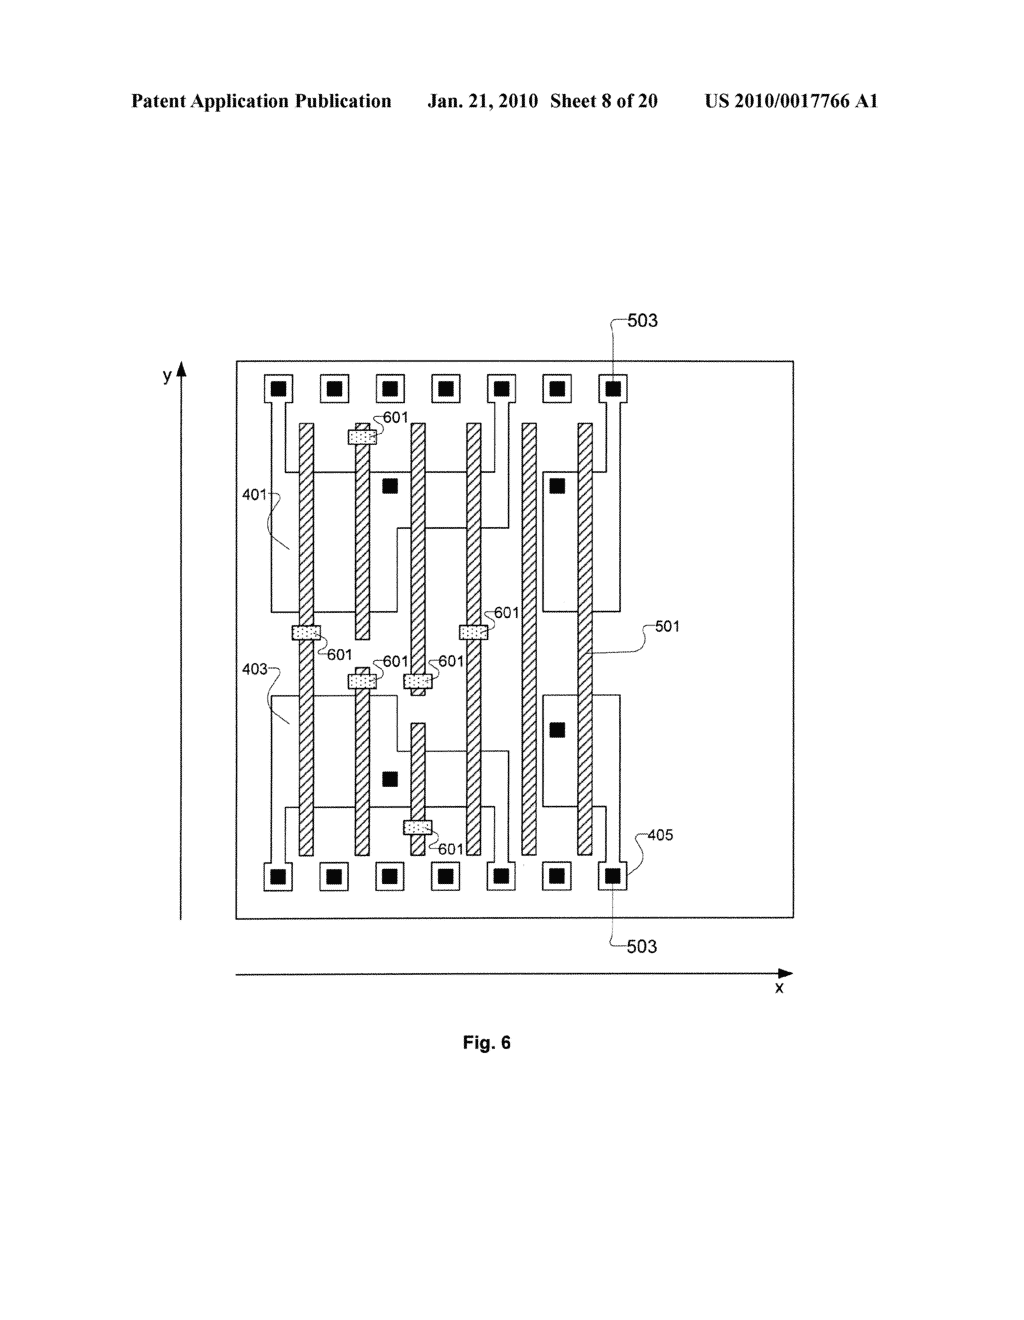 Semiconductor Device Layout Including Cell Layout Having Restricted Gate Electrode Level Layout with Linear Shaped Gate Electrode Layout Features Defined with Minimum End-to-End Spacing and At Least Eight Transistors - diagram, schematic, and image 09